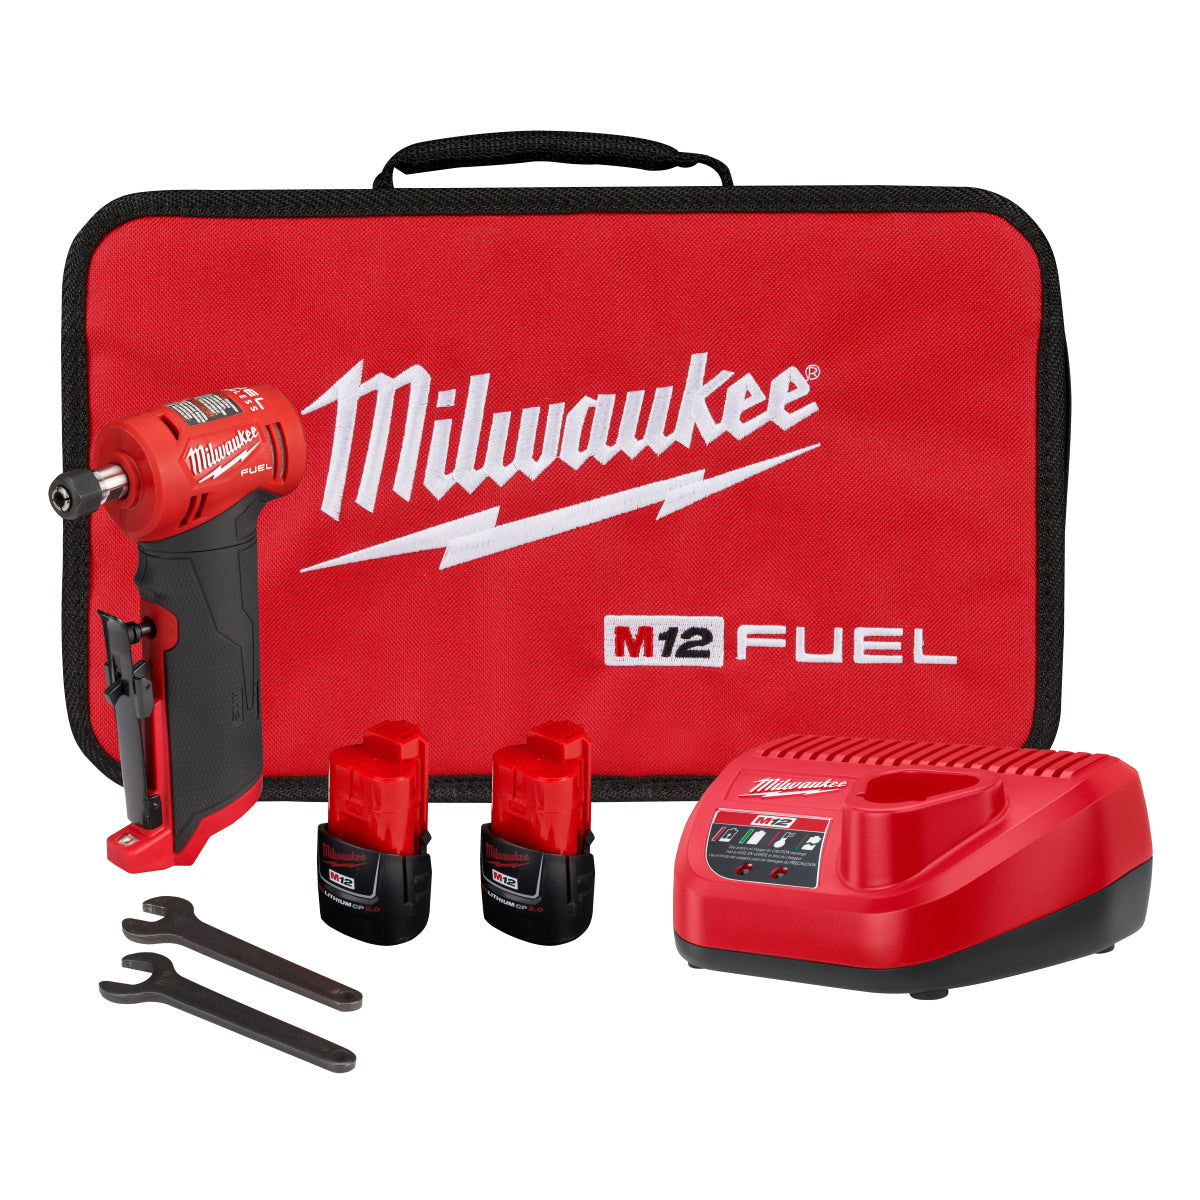 Milwaukee M12 FUEL 1/4 Inch Right Angle Die Grinder 2 Battery Kit (2485-22)